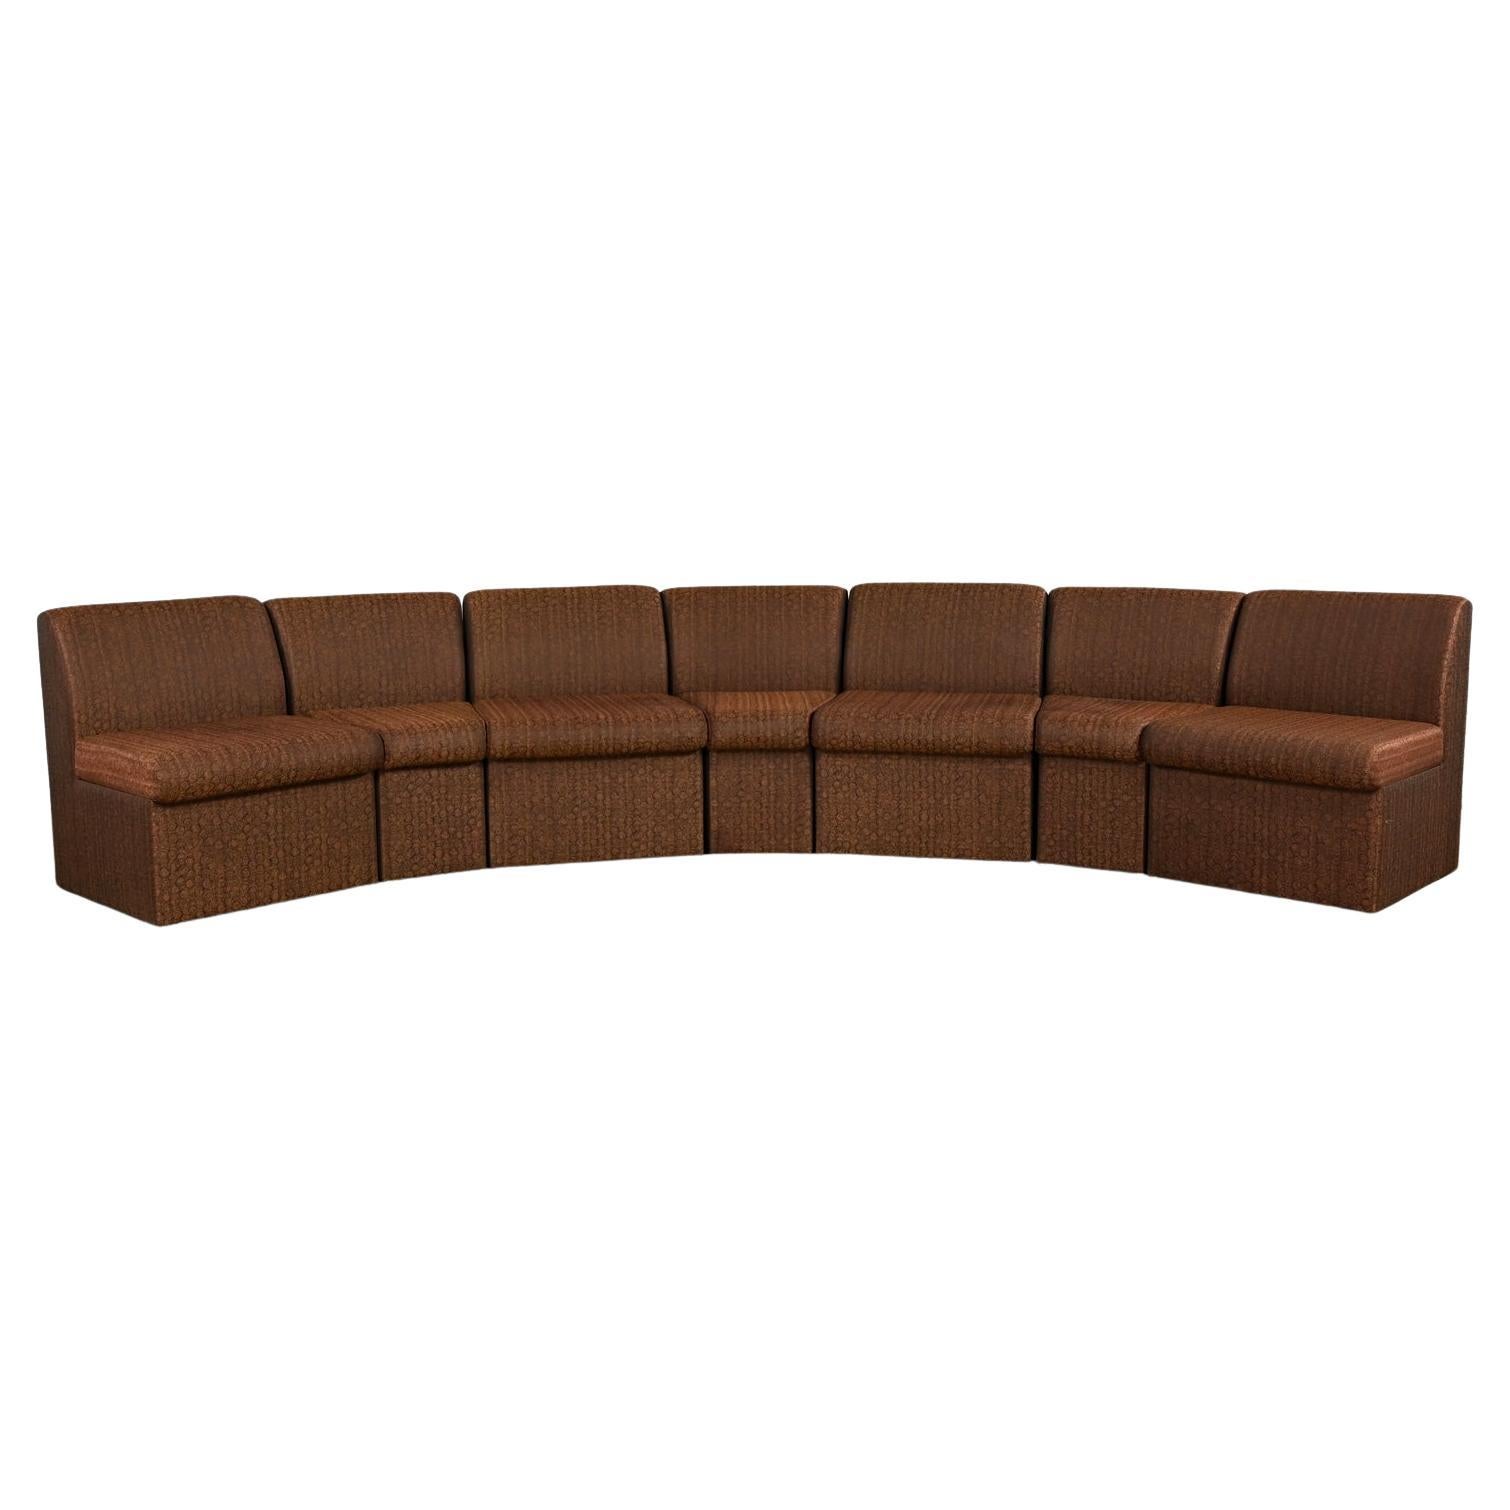 Late 20th Century Modern Global Upholstery Company Brown 7 Piece Sectional Sofa